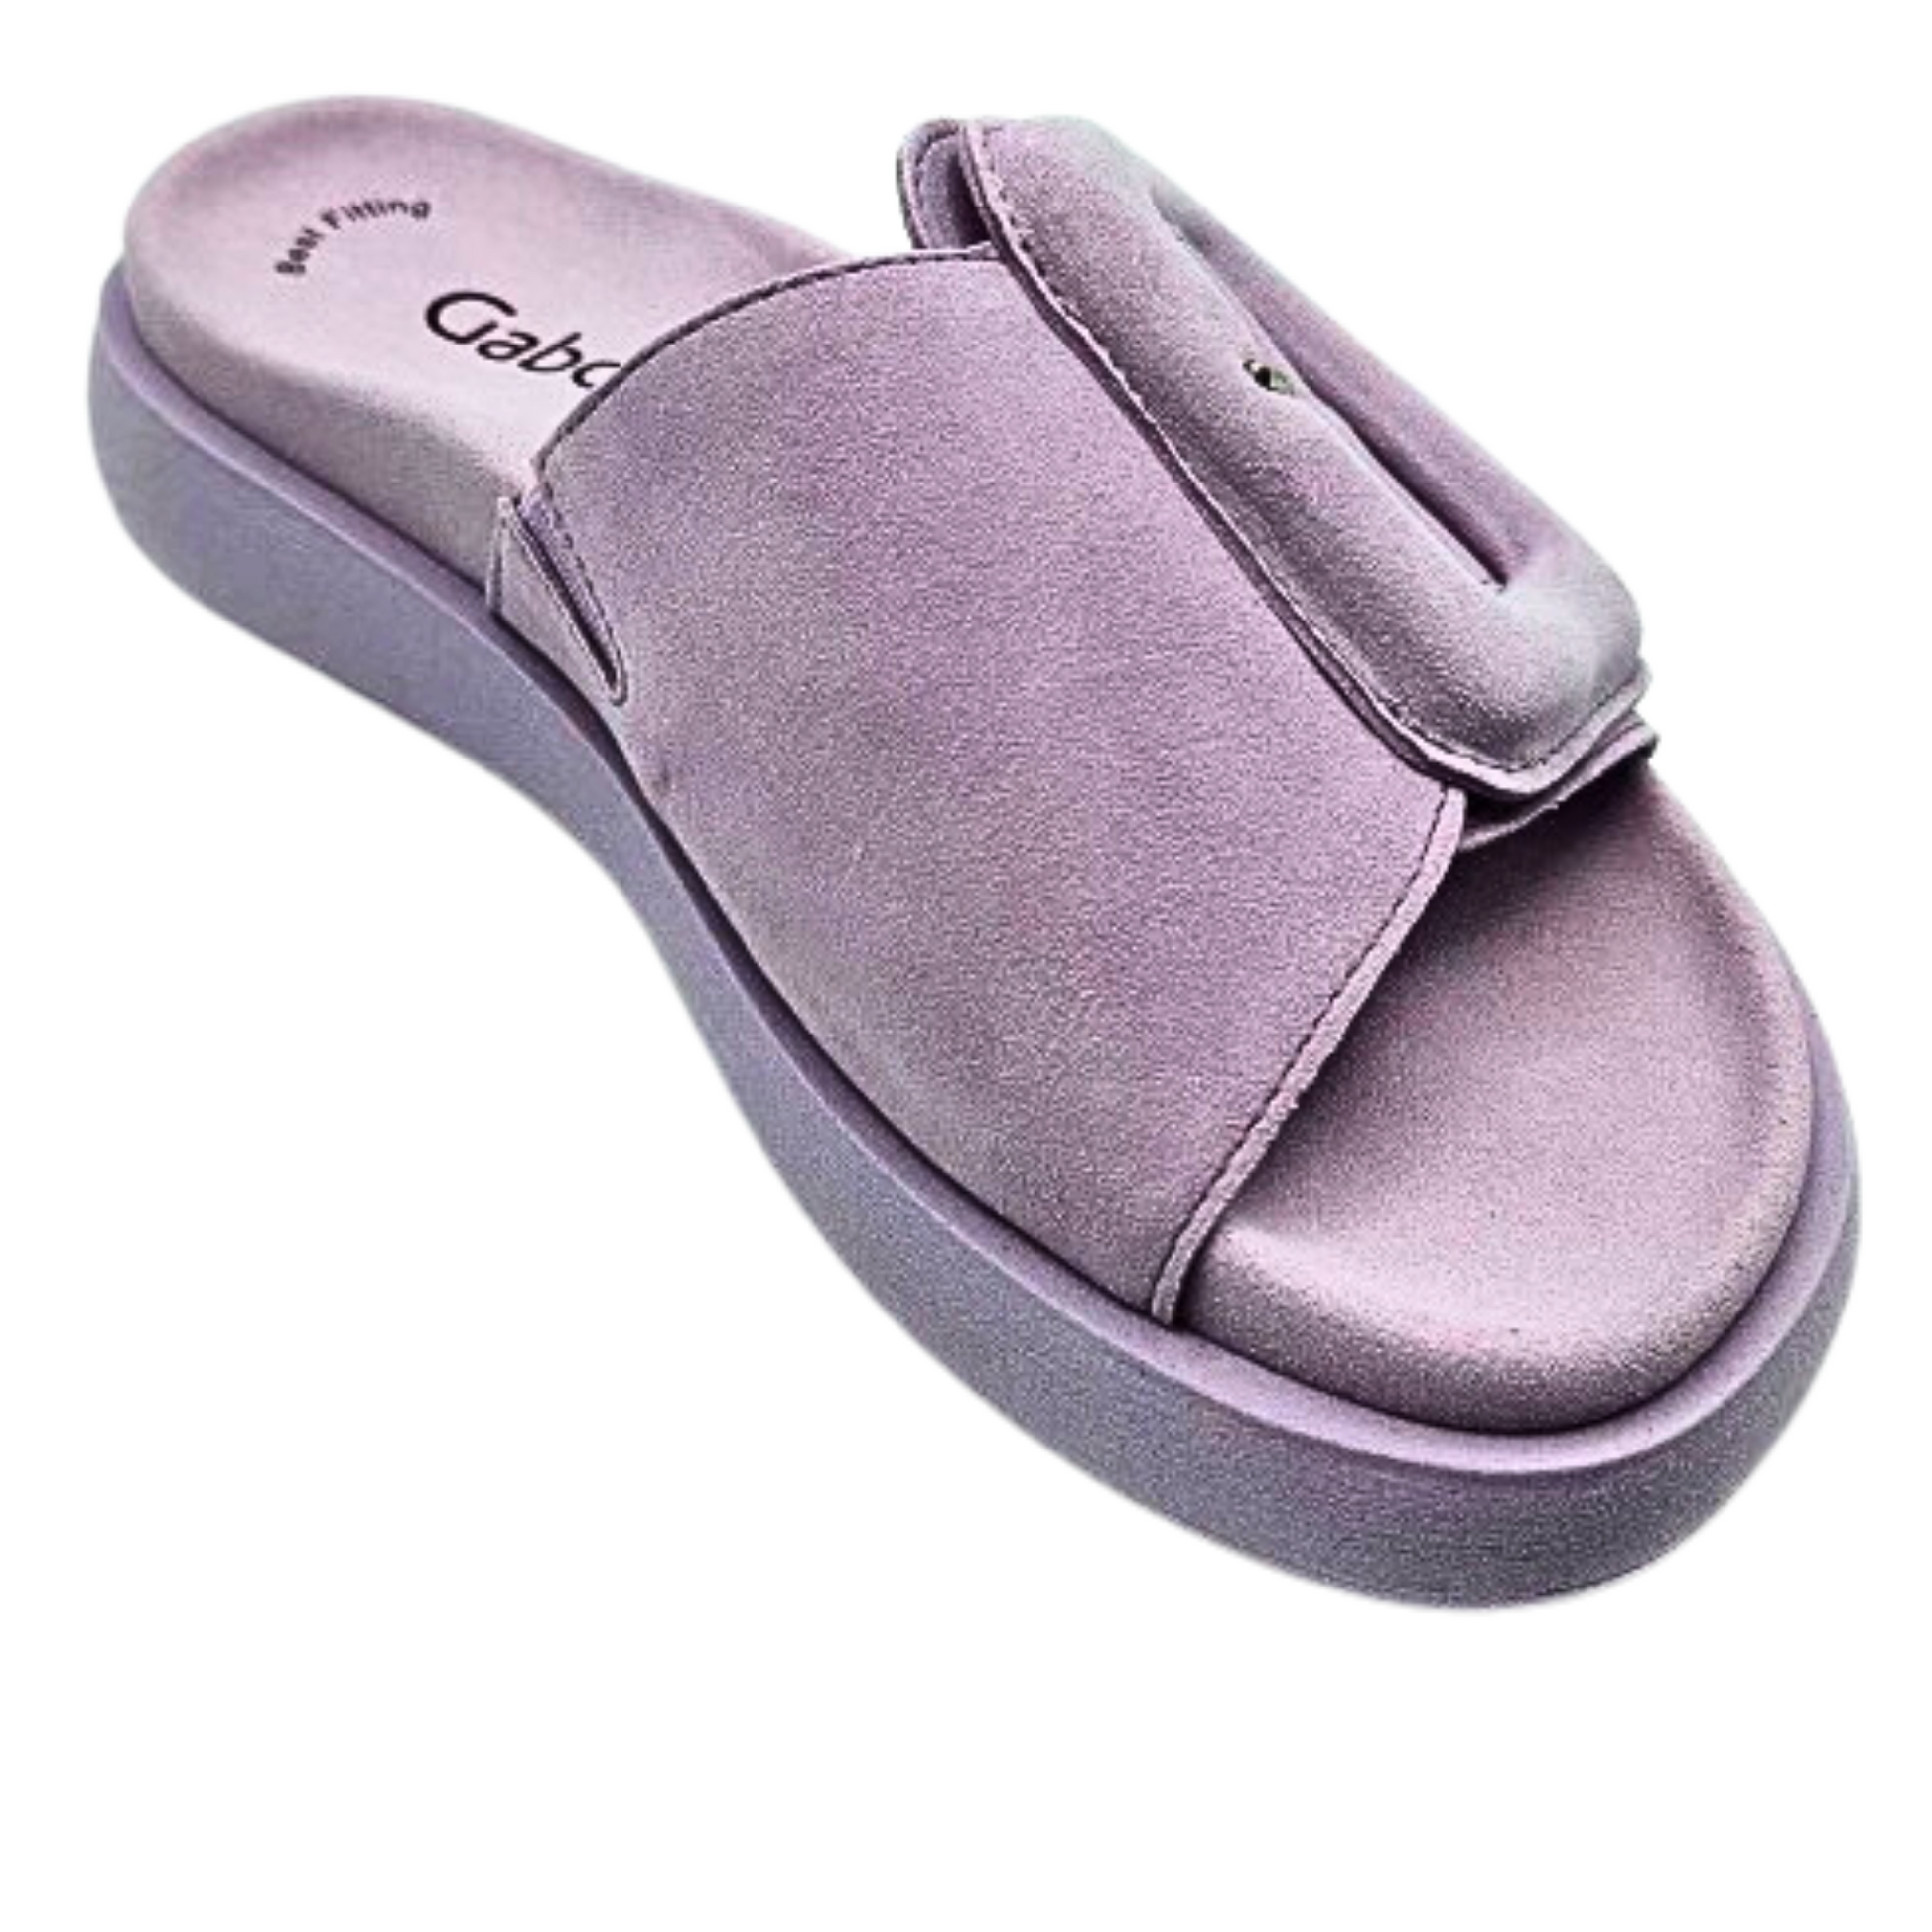 Angled shot of left shoe.  Shoe is a mule (open toe open back) so it is a slip on style.  Nicely contoured footbed for support.  Tone on tone in a lilac color so entire shoe looks as one